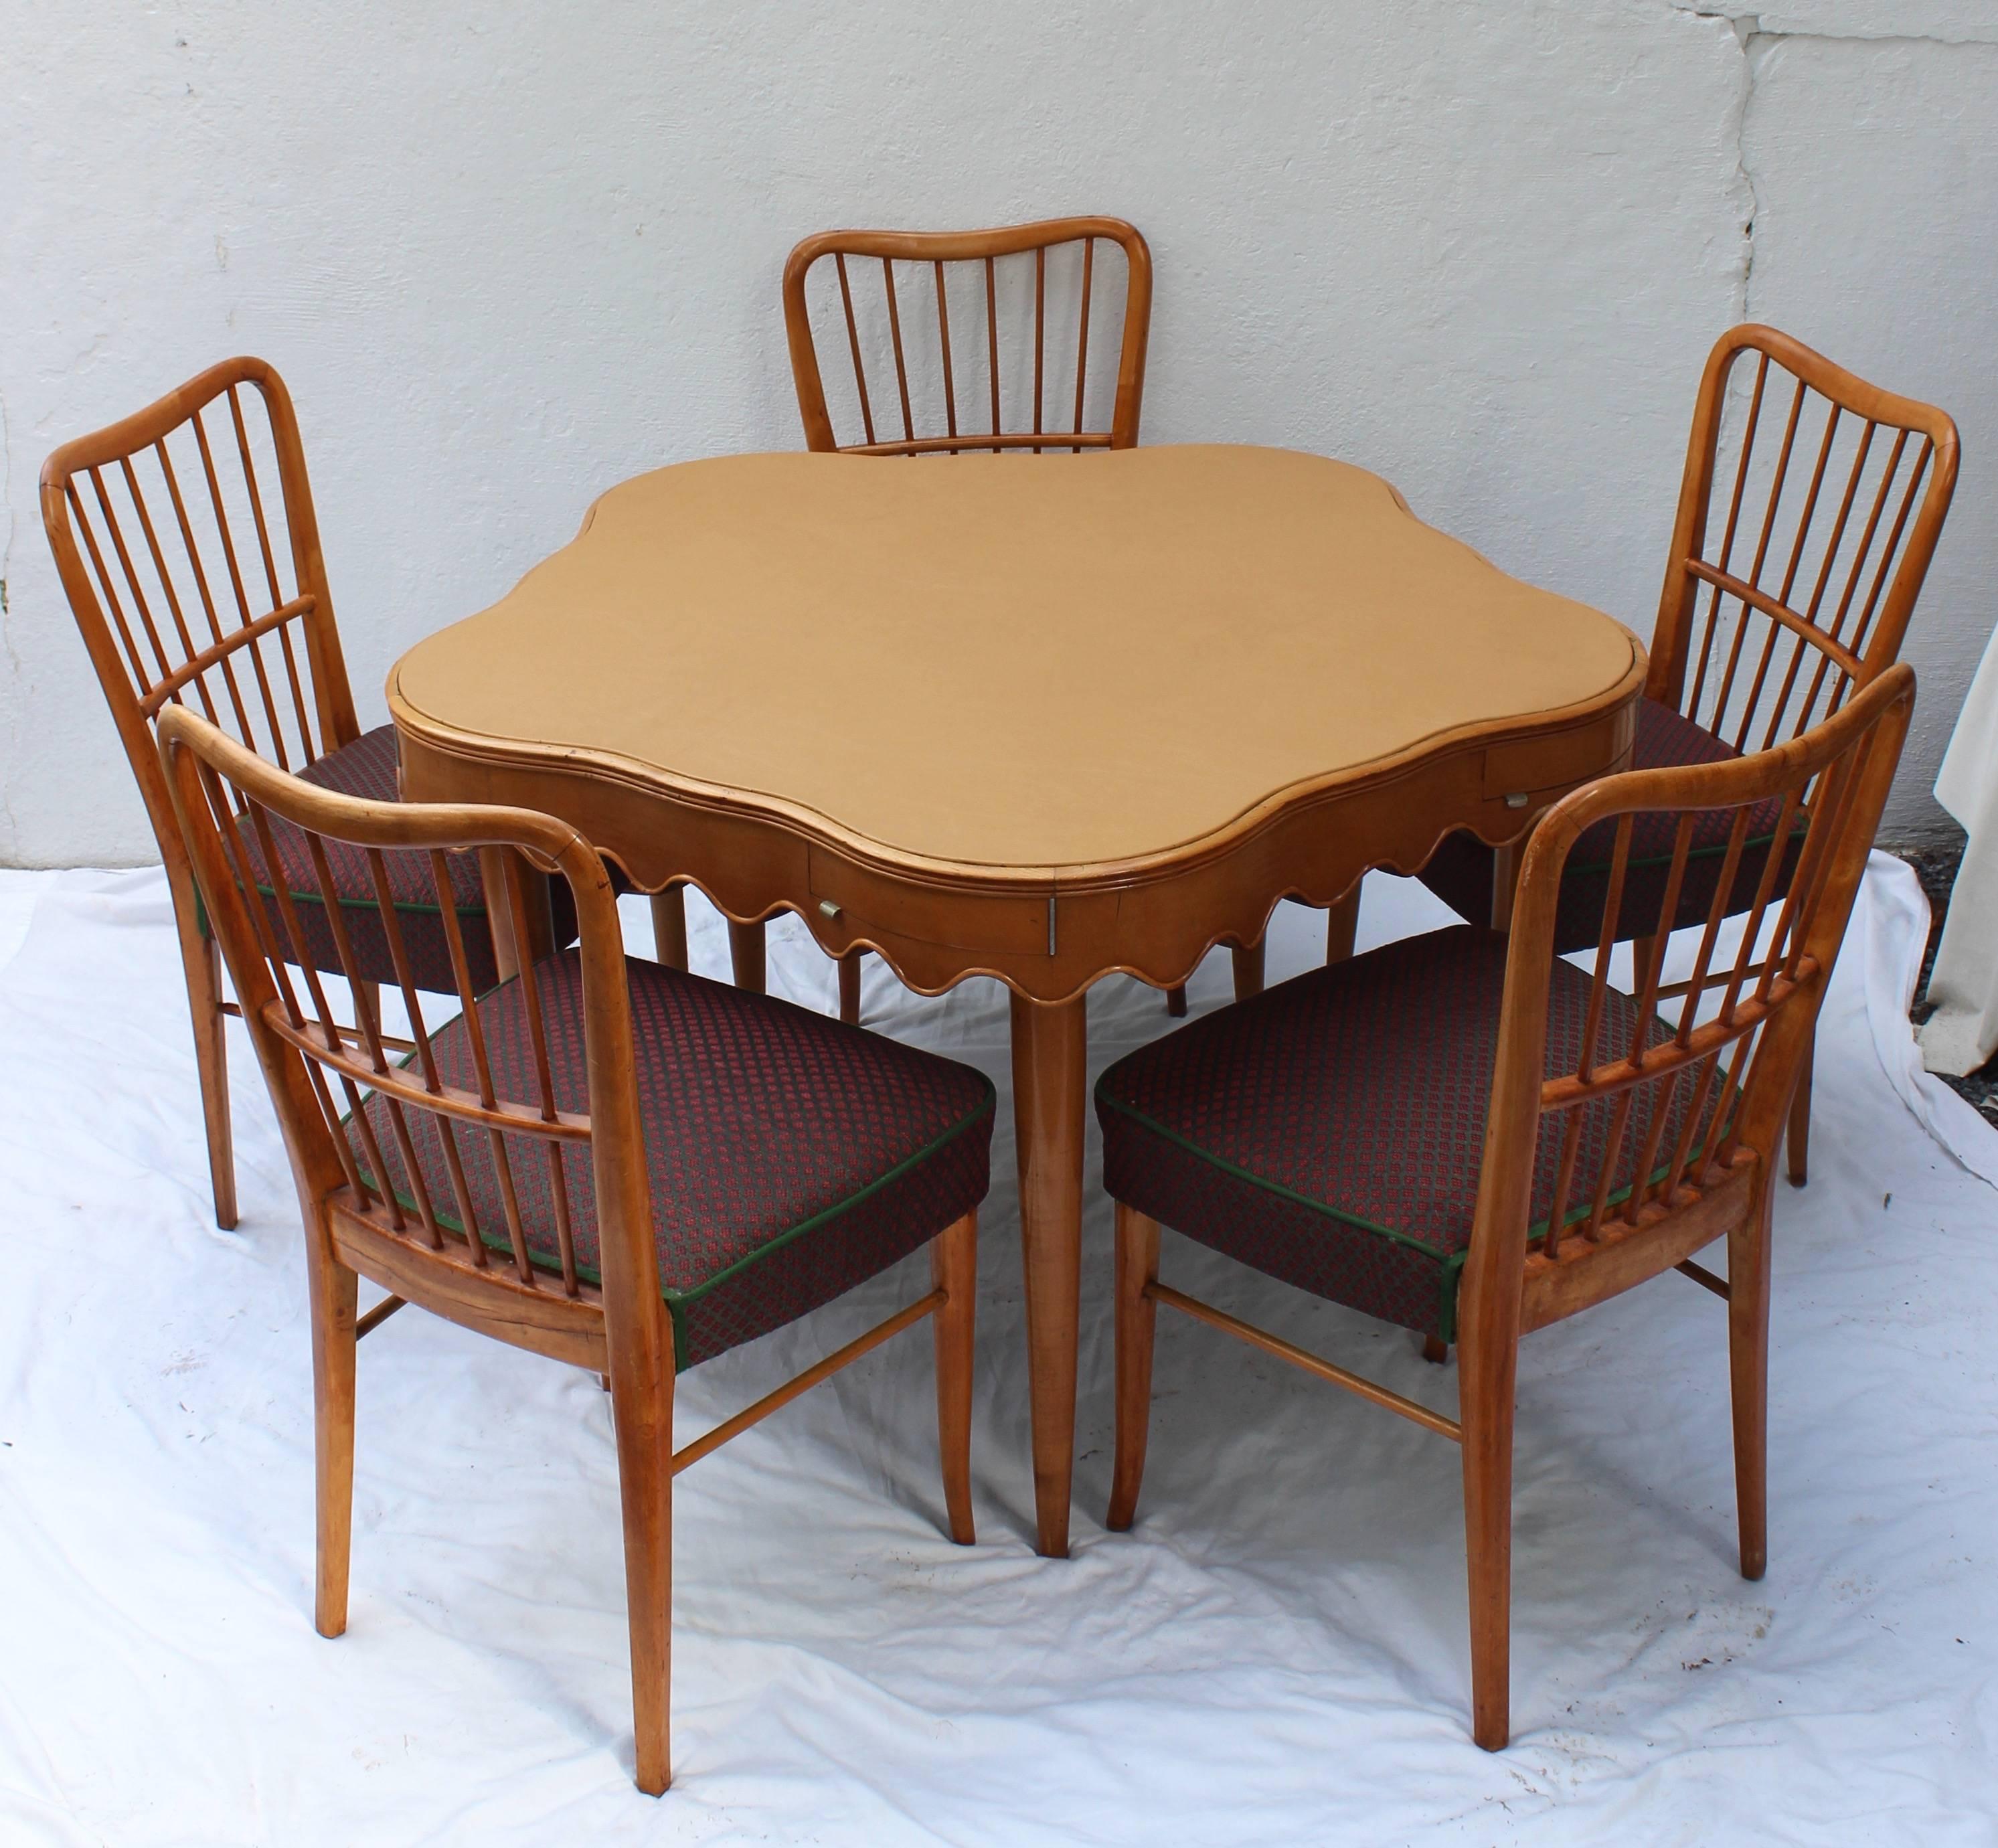 Italian Sycamore game table with five chairs attributed to Paolo Buffa, beautifully proportioned with original horsehair upholstered seats in very good condition.
Tabletop covered with leather and measures 43